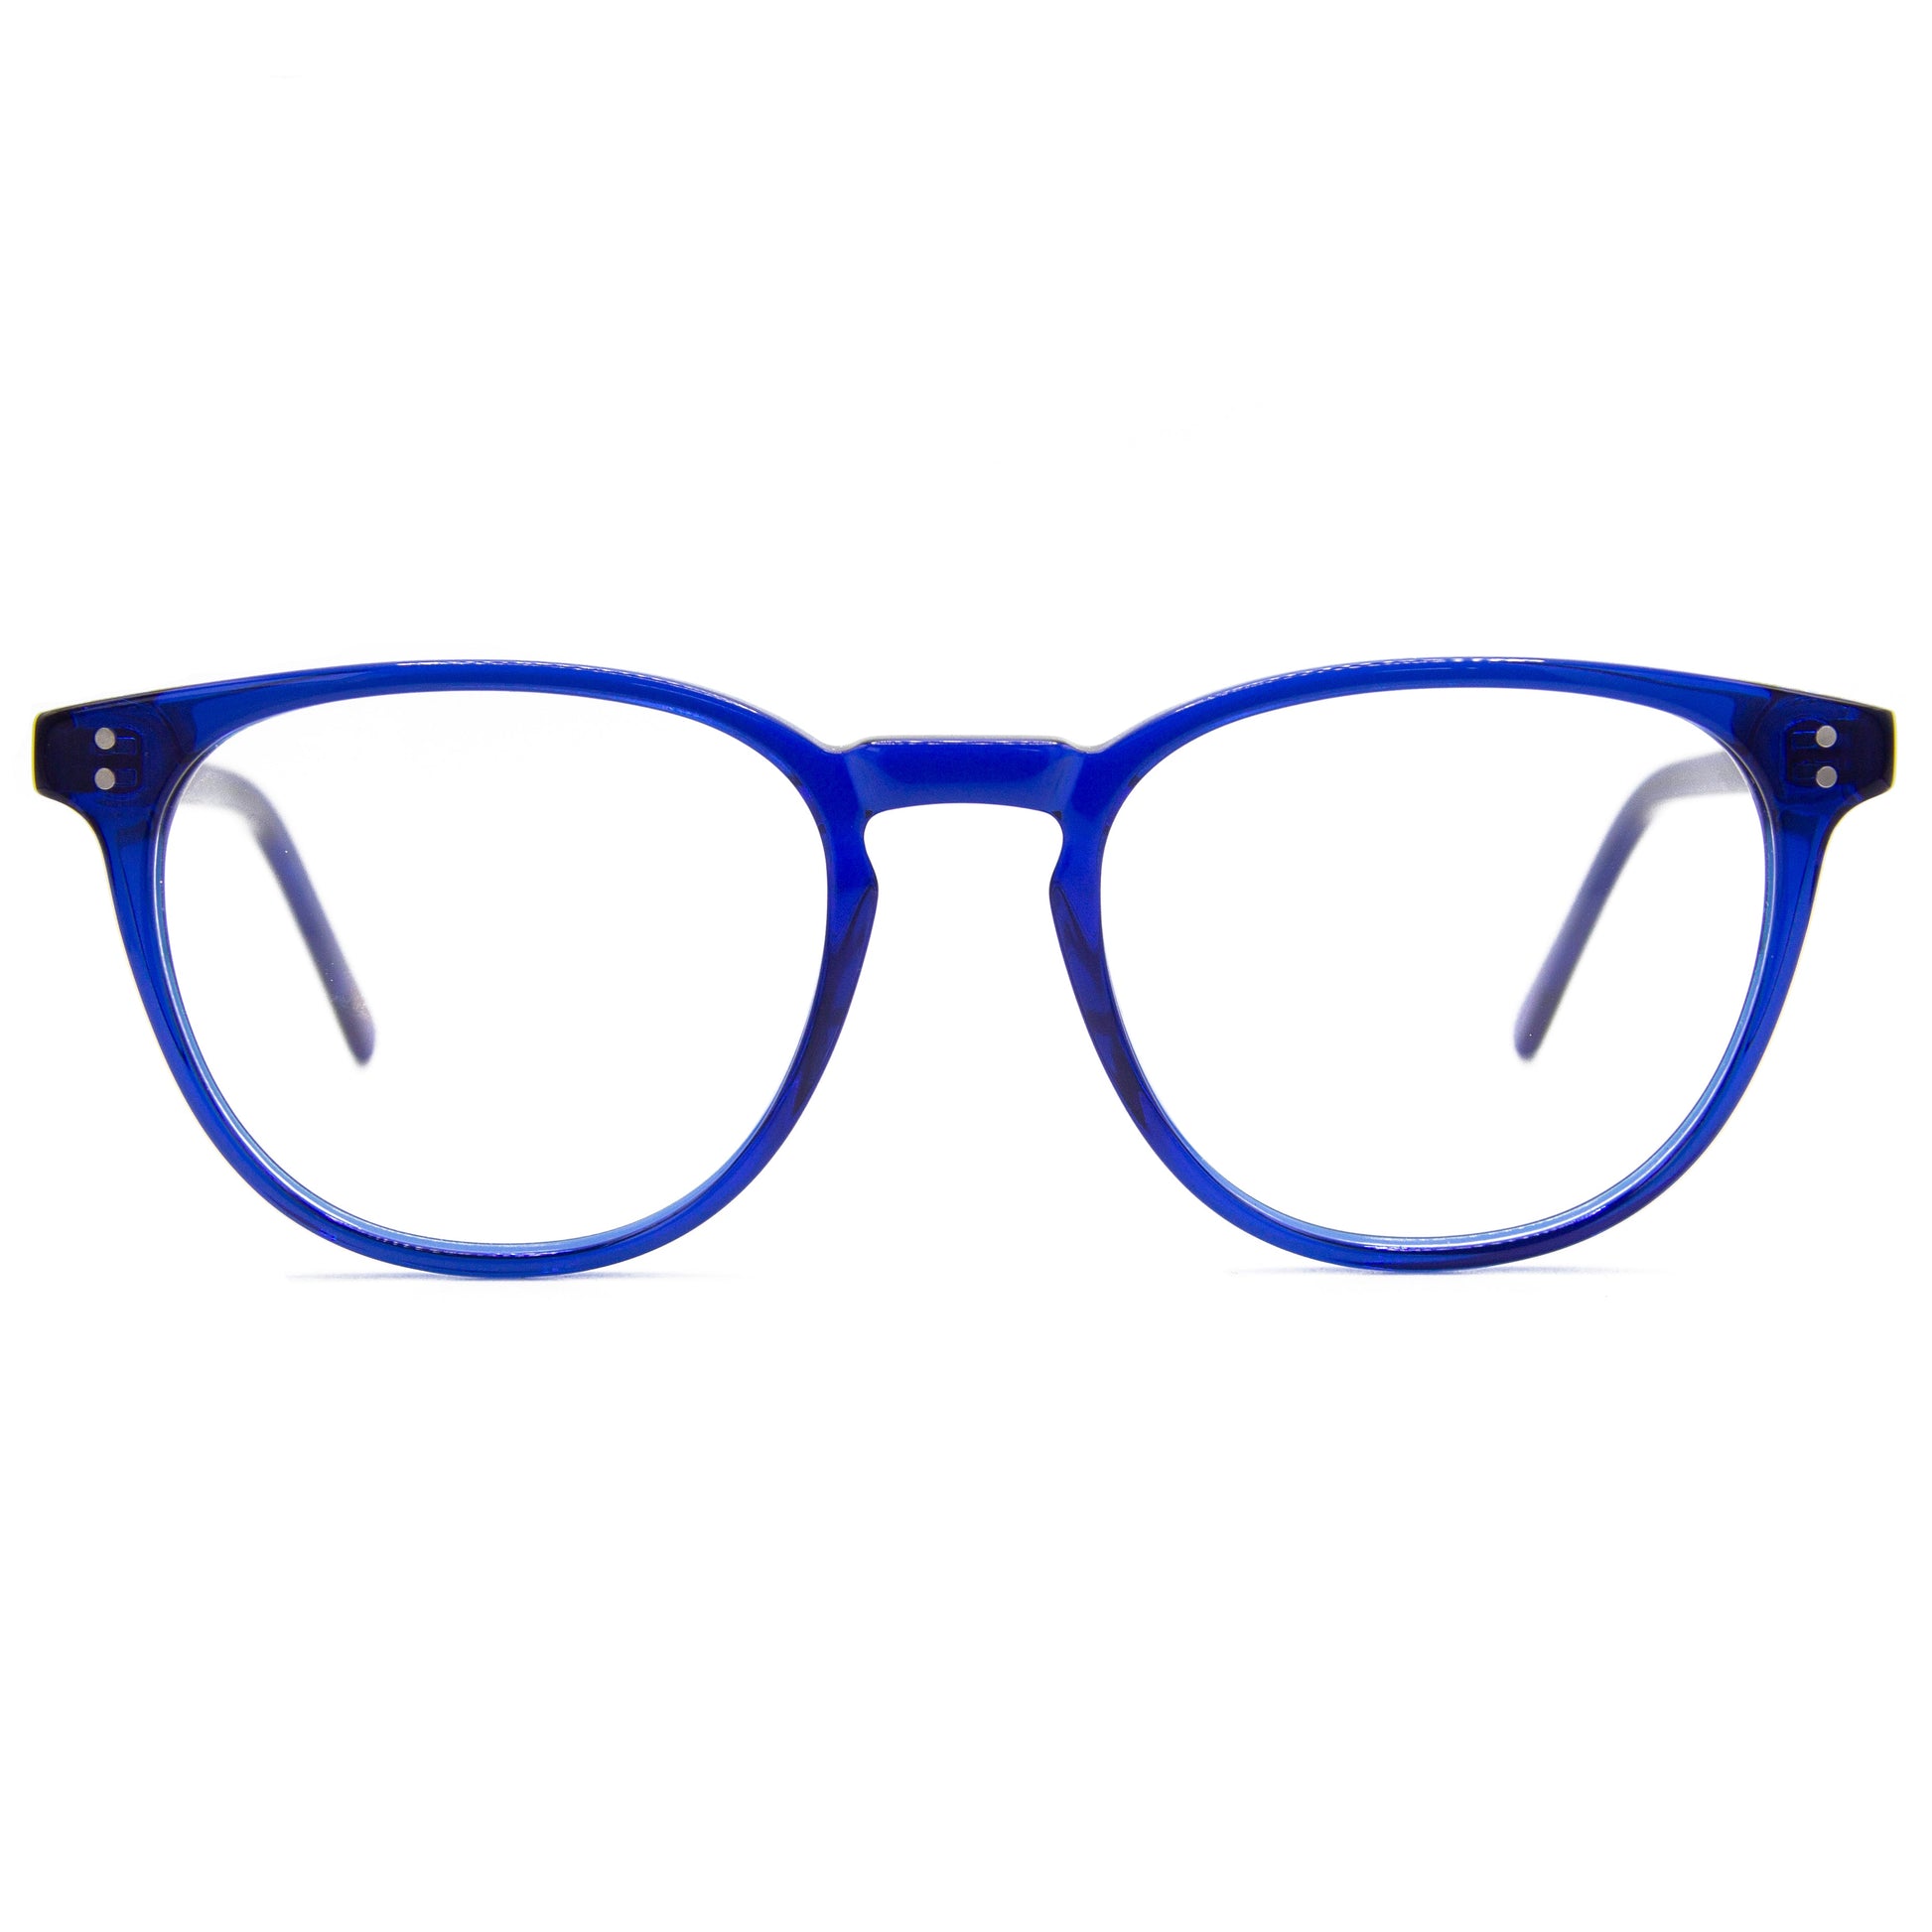  3 brothers - Ant - Navy - Prescription Glasses